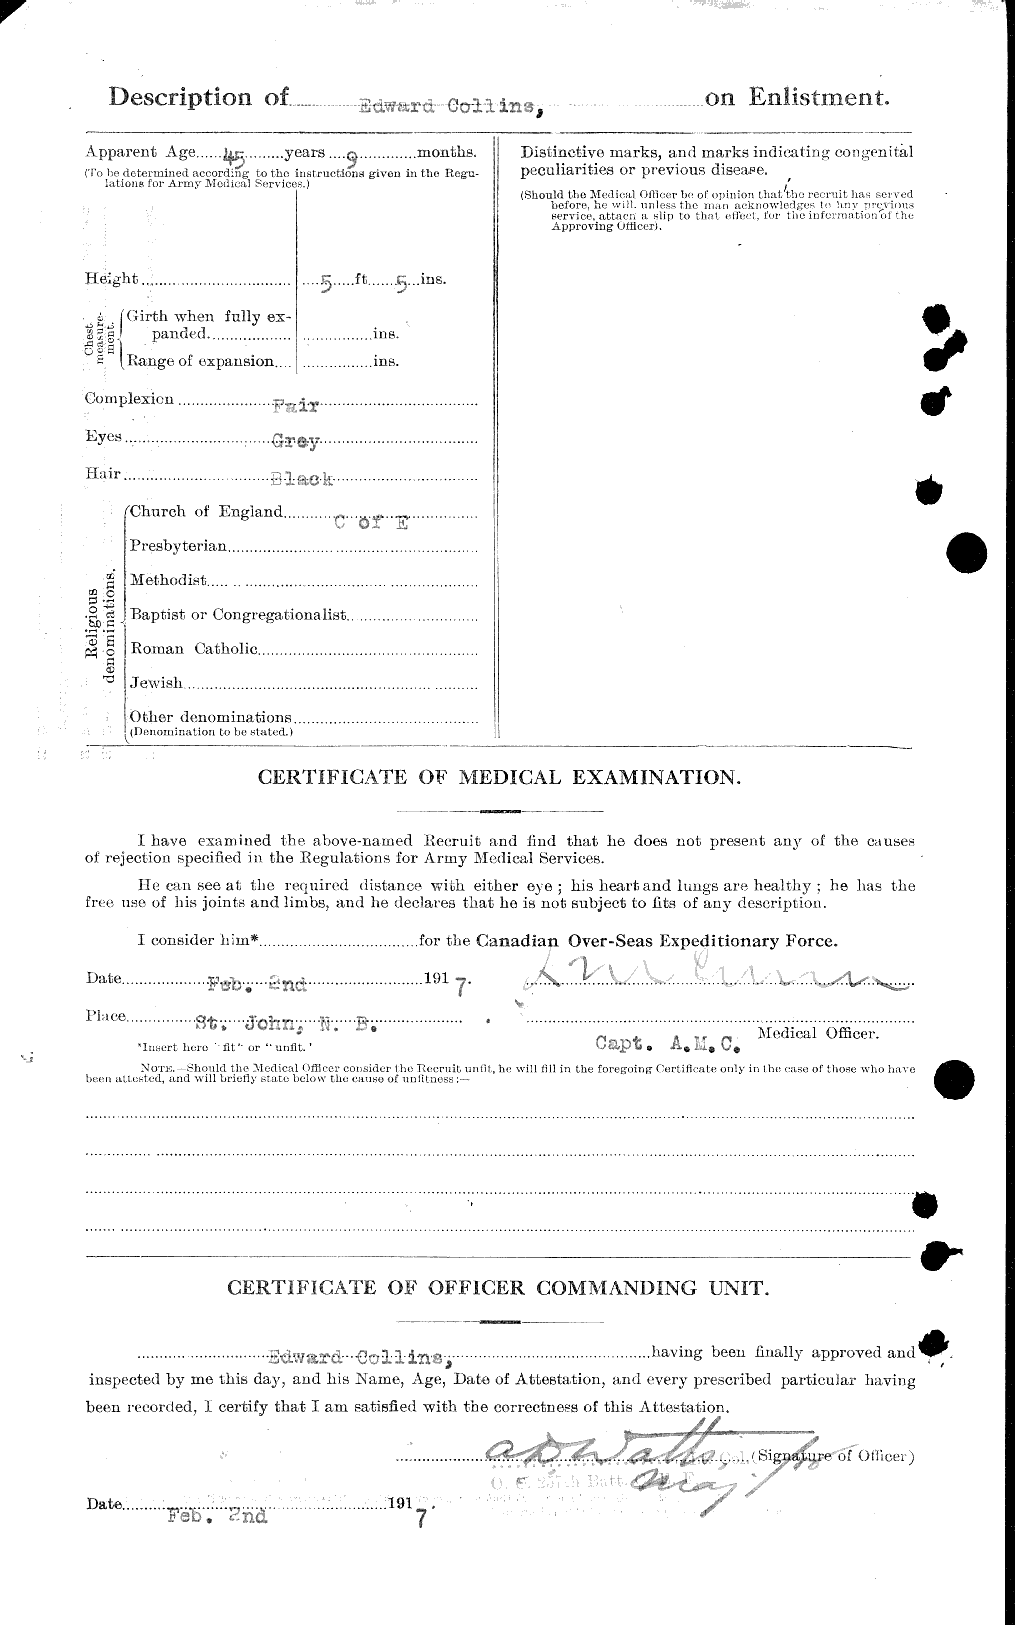 Personnel Records of the First World War - CEF 037741b